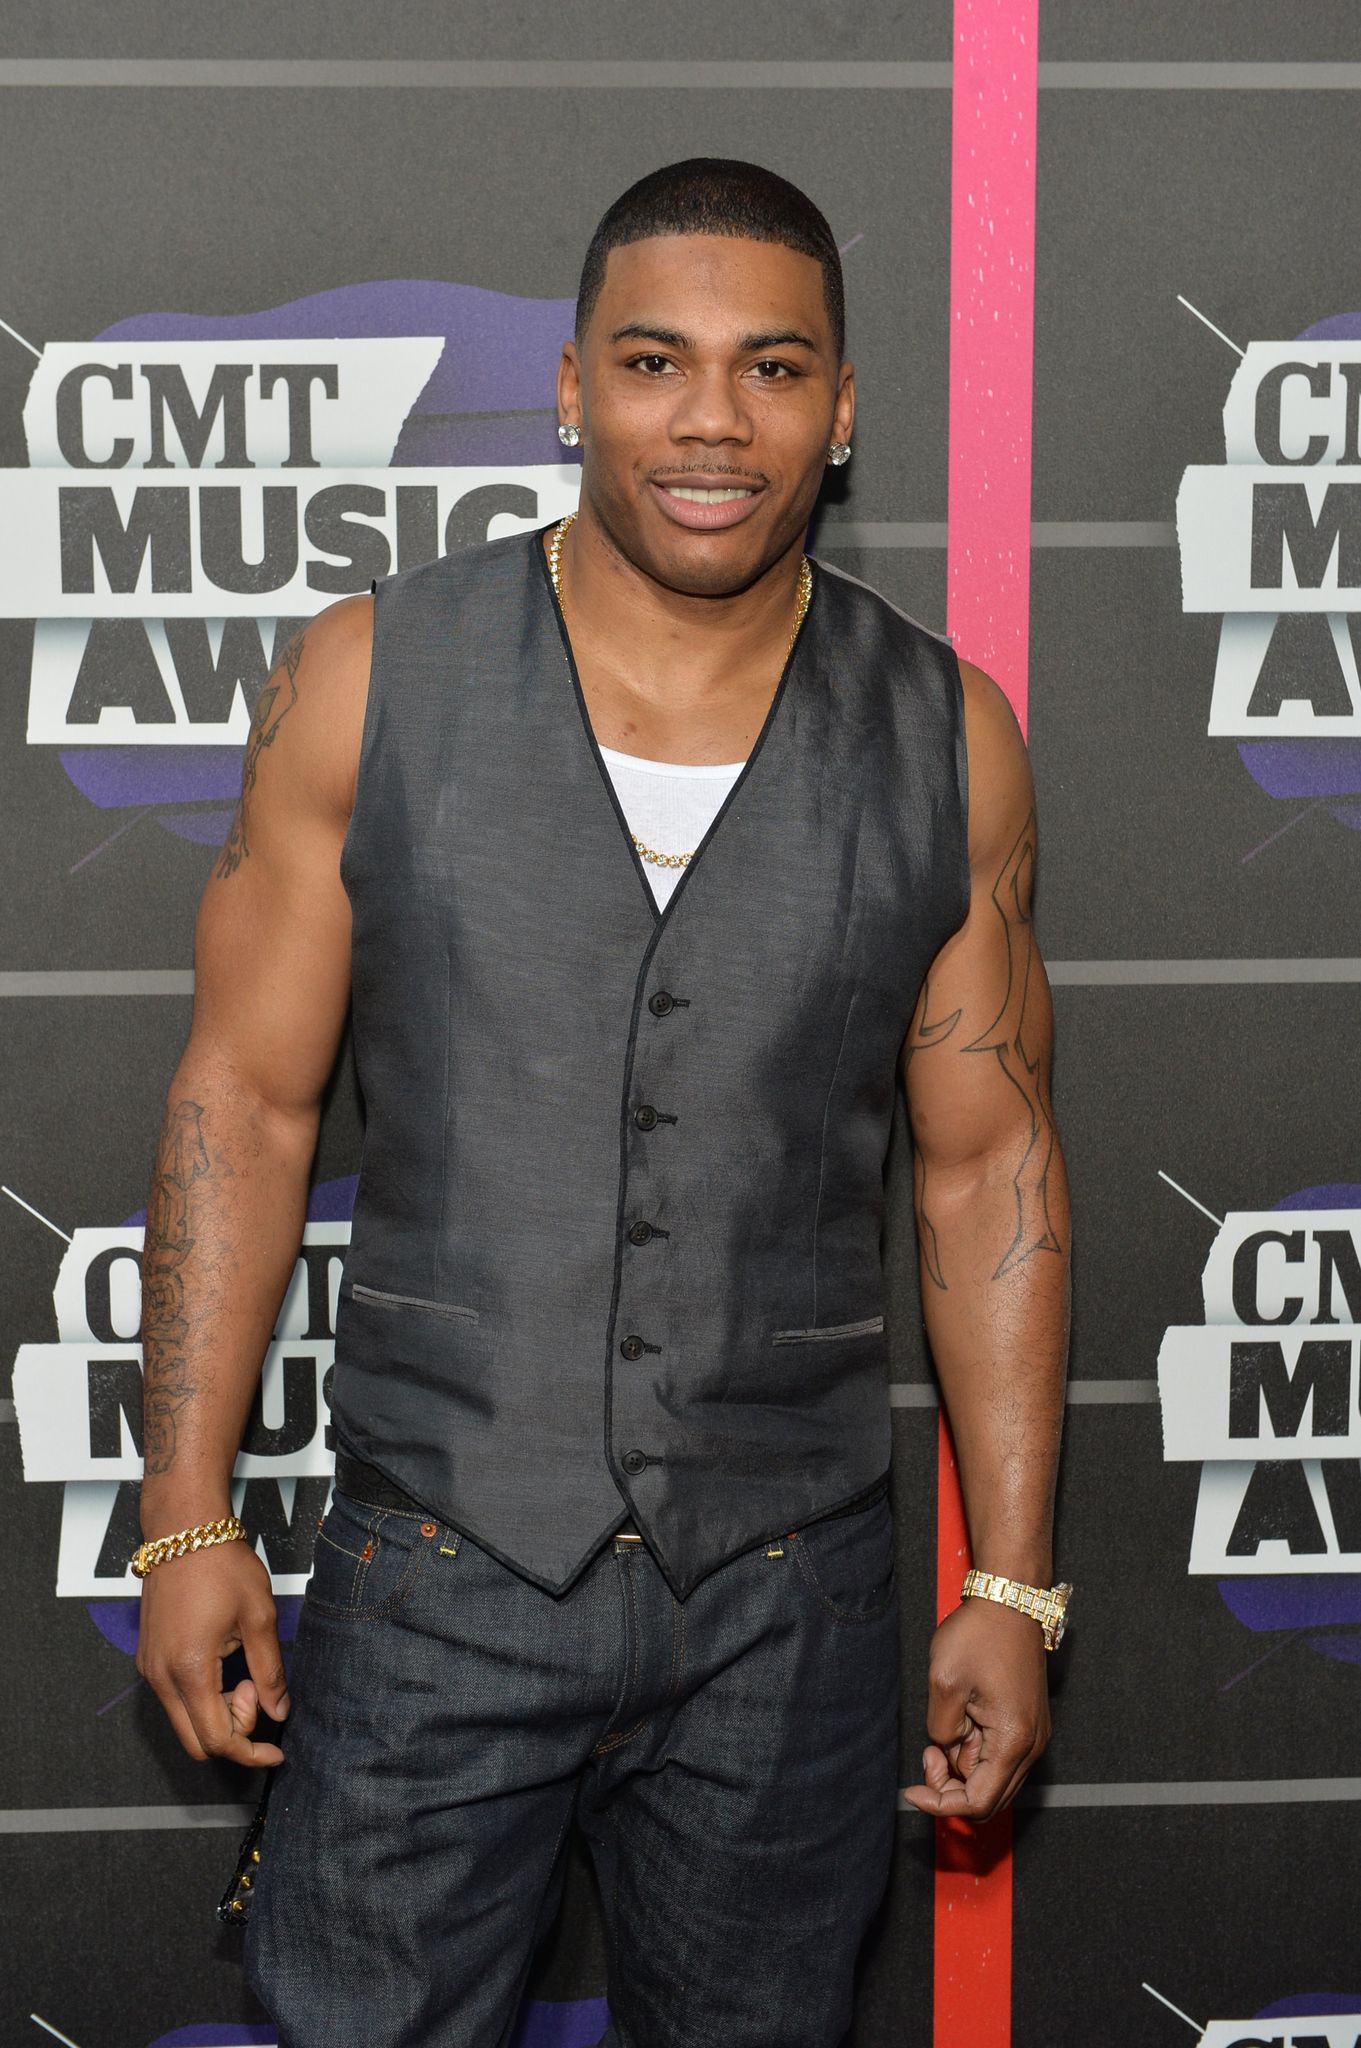 Nelly attends the 2013 CMT Music Awards at the Bridgestone Arena on June 5, 2013 | Photo: Getty Images